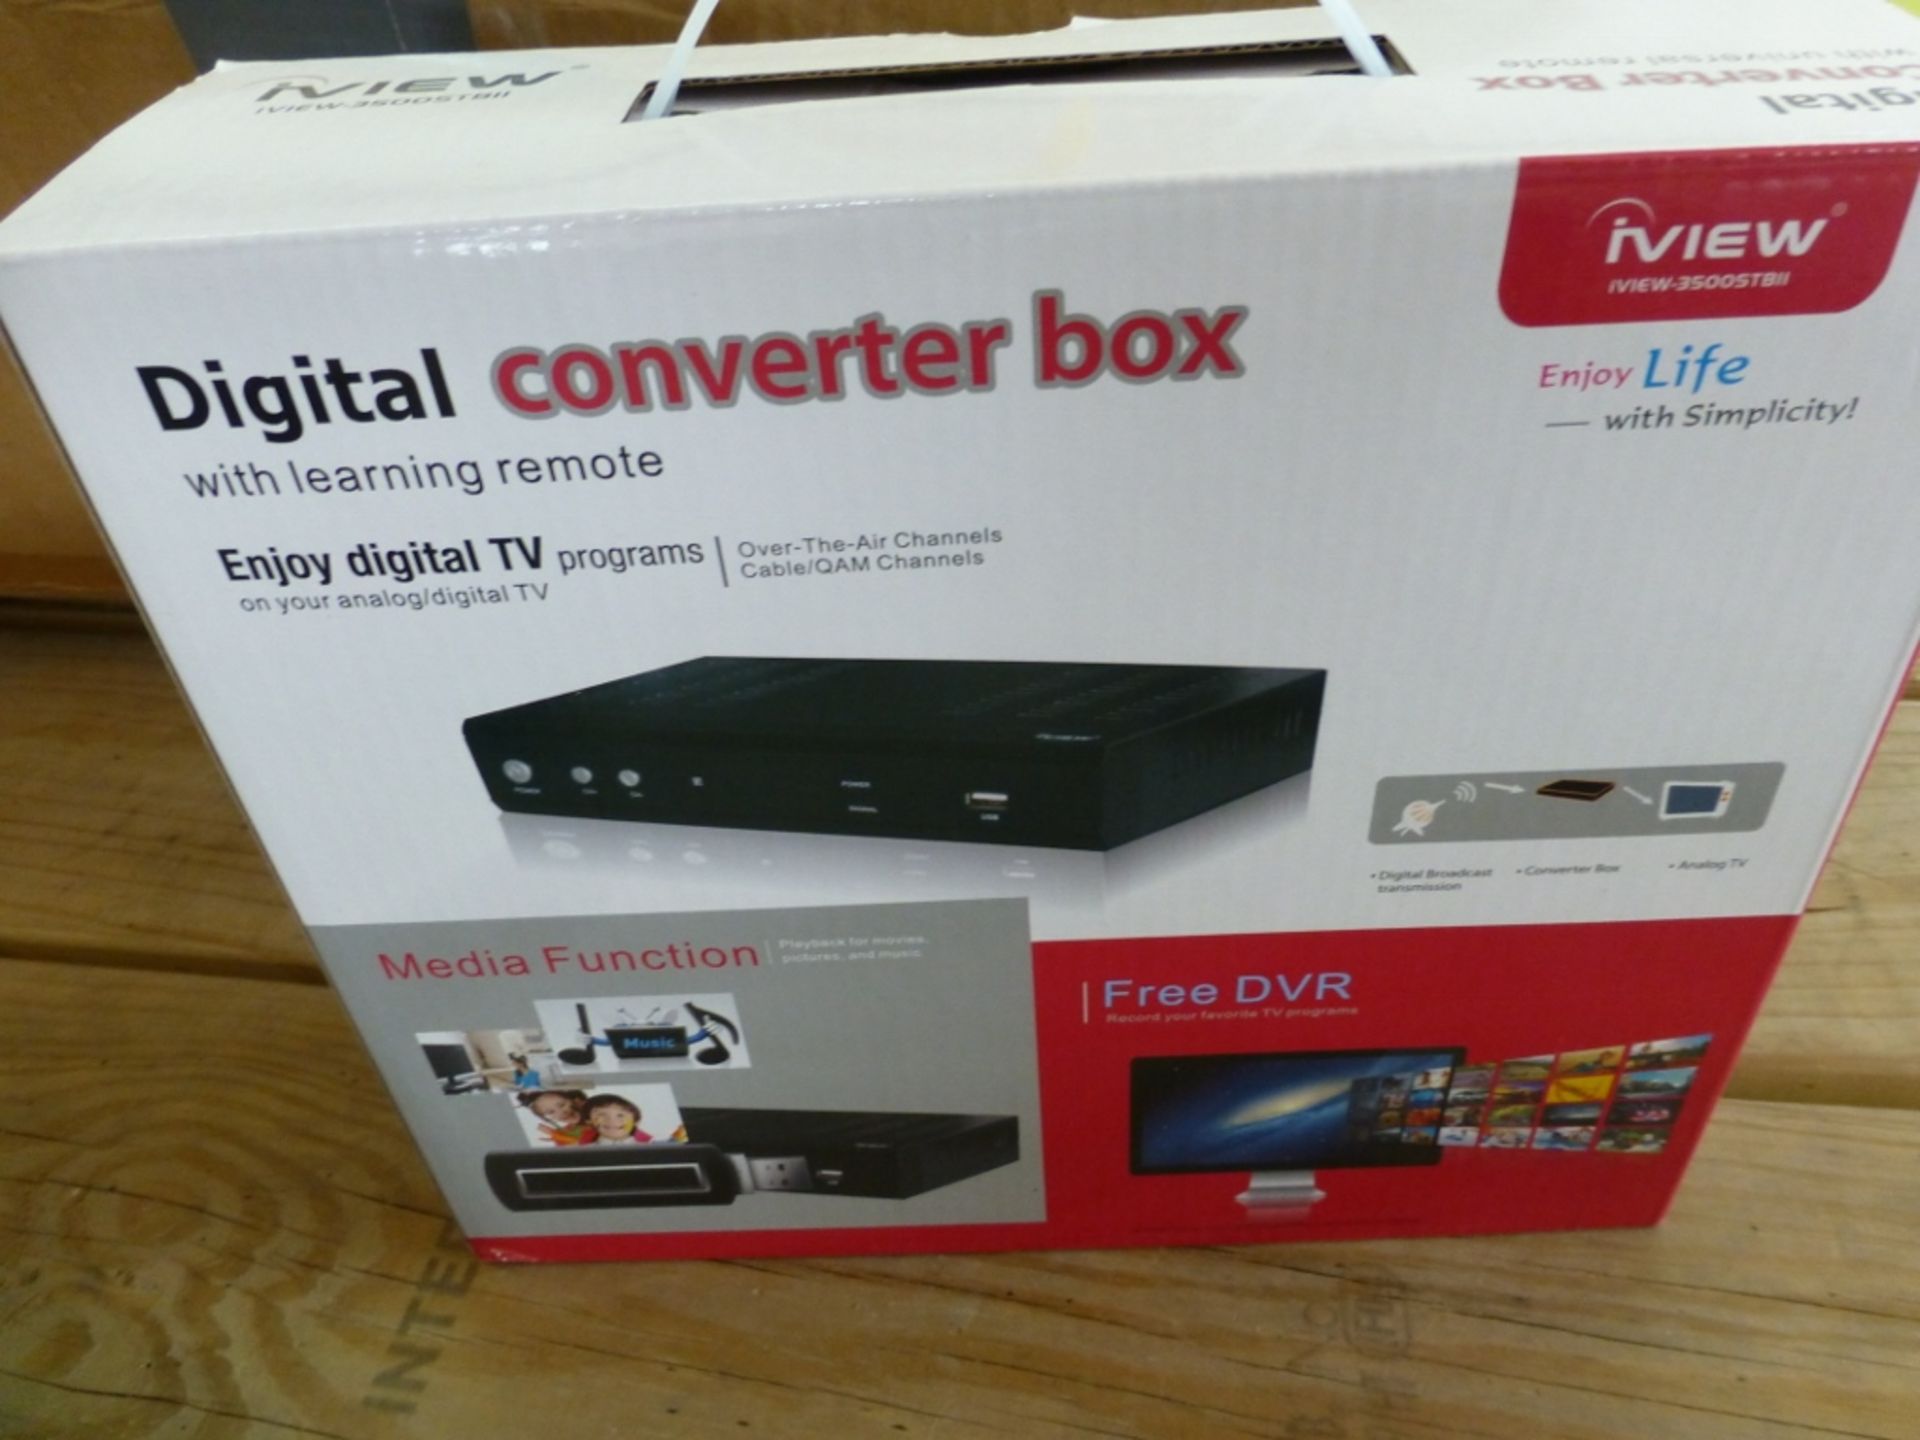 Samtron VCR with Memorex DVD player and digital converter box - Image 3 of 3